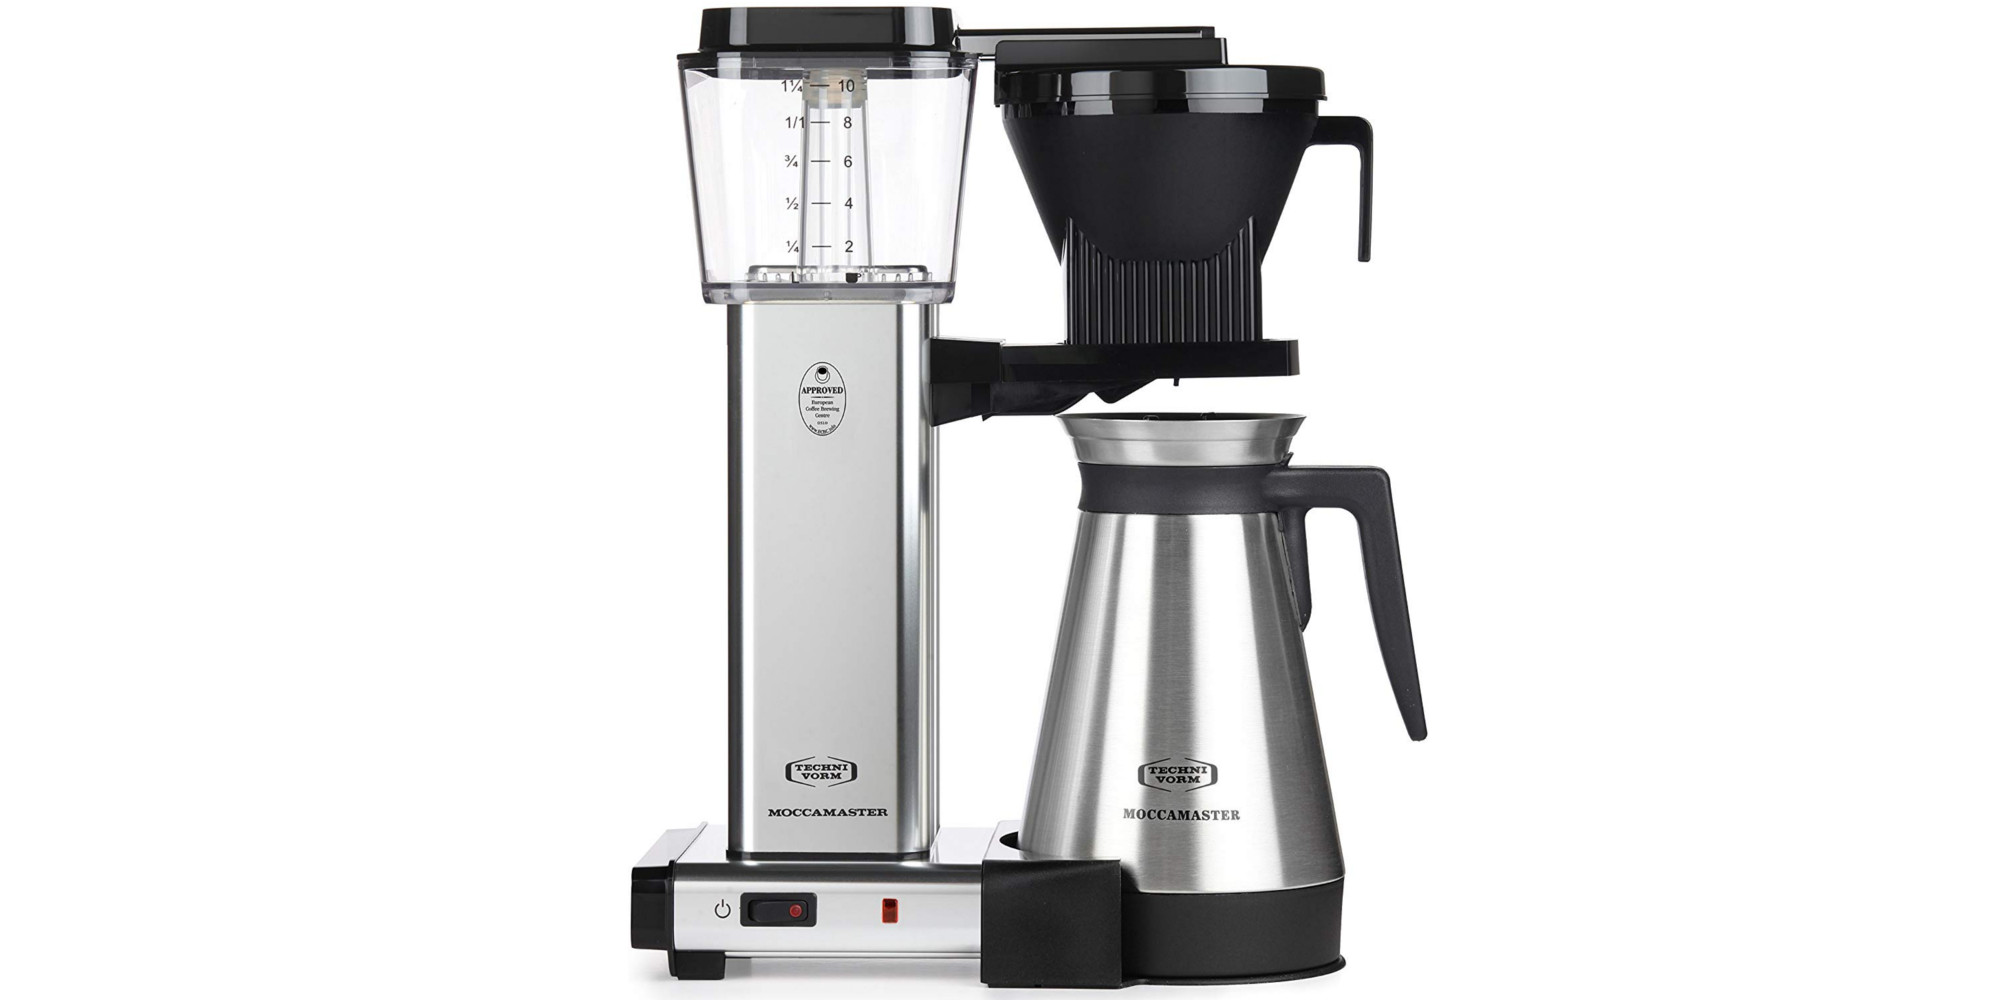 Nearly 65 off Technivorm Moccamaster coffee makers at